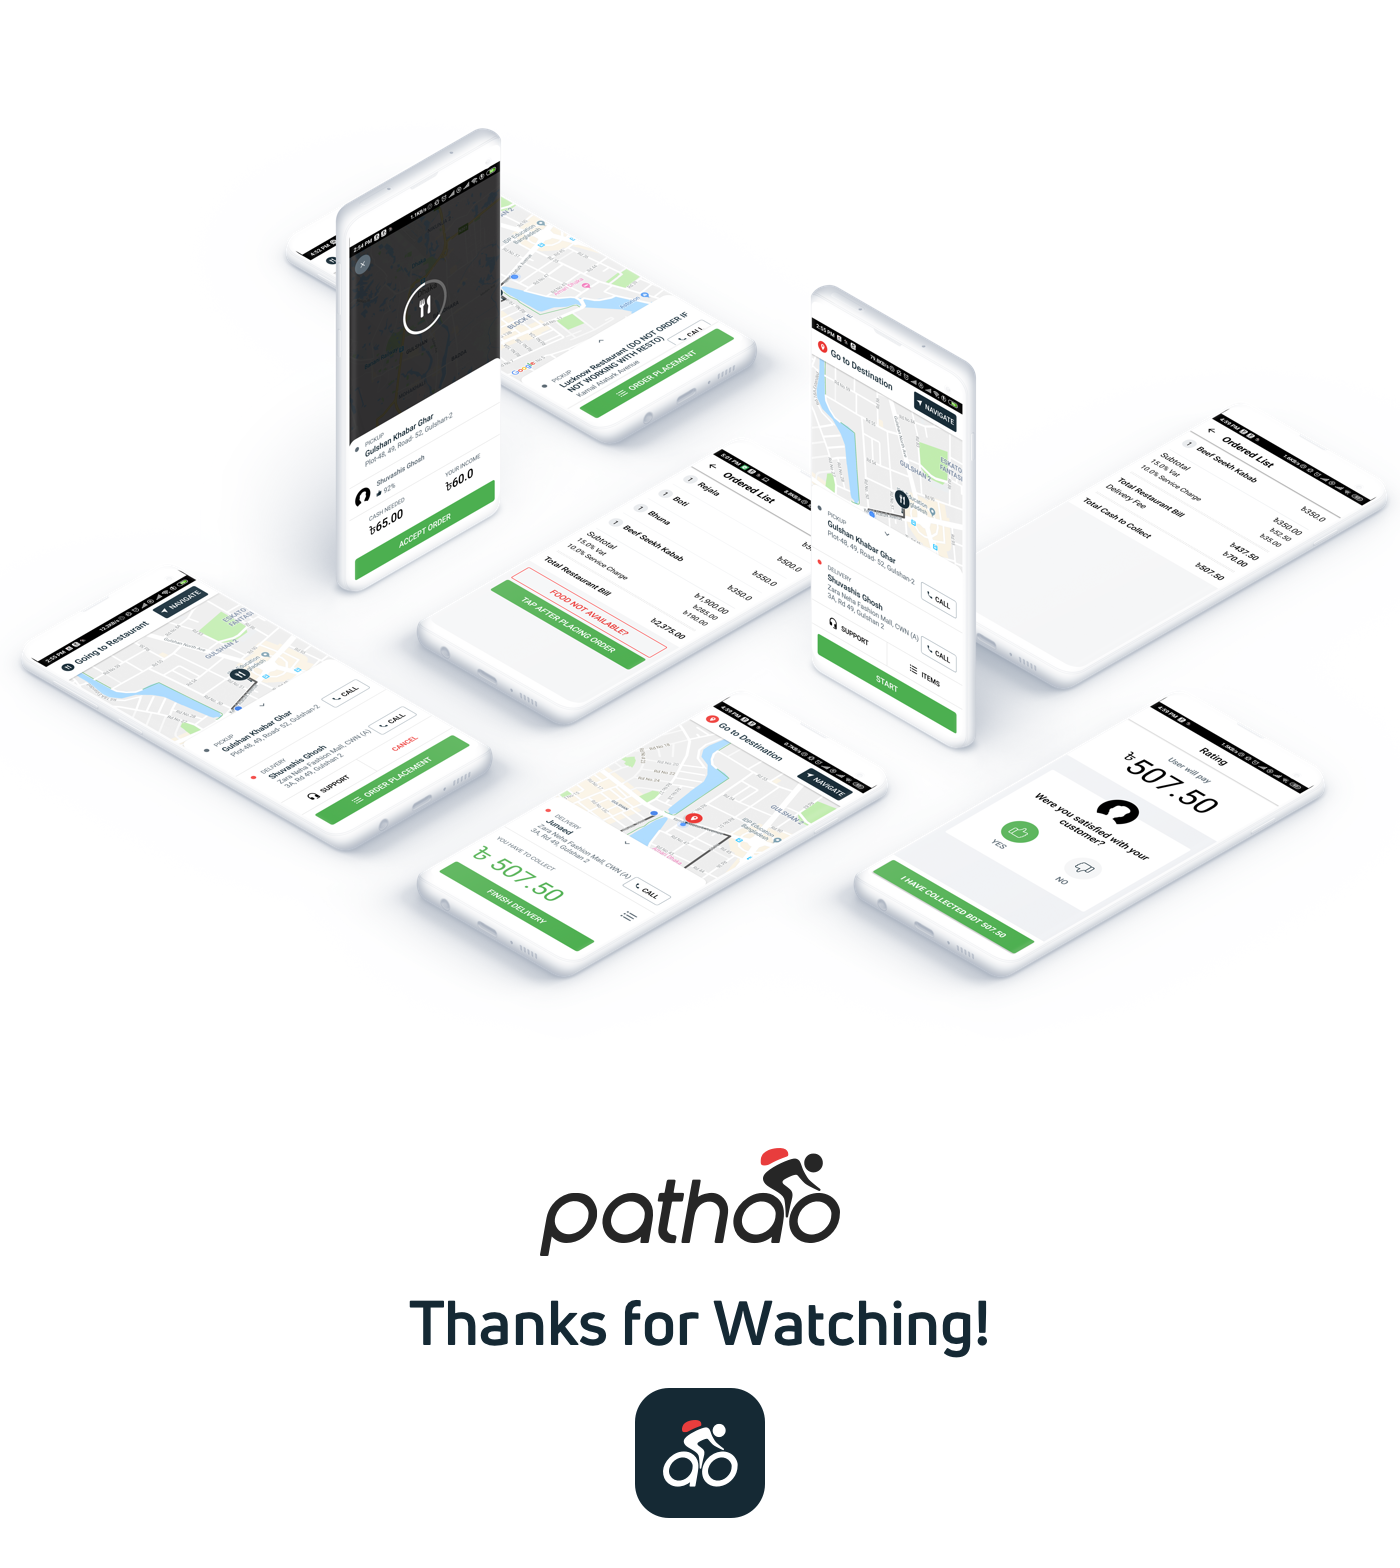 Pathao food delivery Bangladesh UI app product design  interaction mobile user experience user interface design